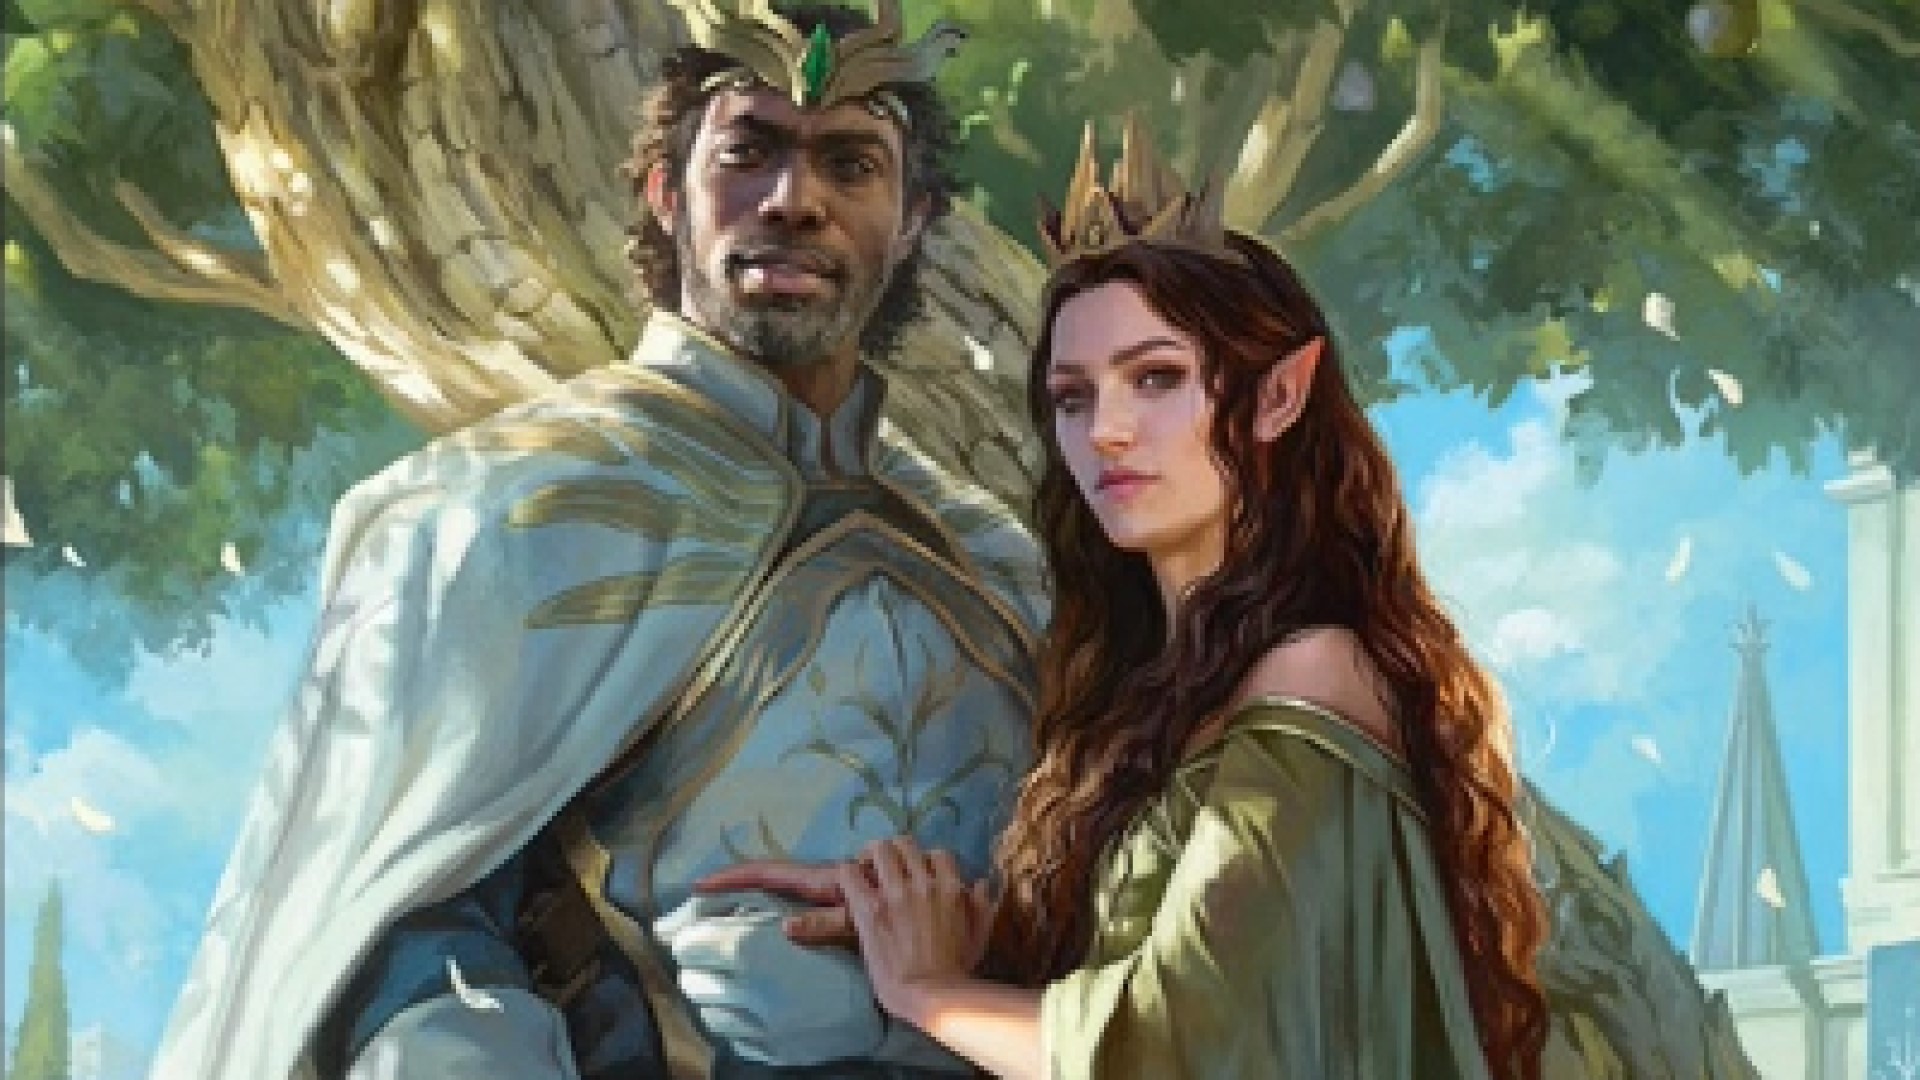 MTG Lord of the Rings' Aragorn is black, please get over it